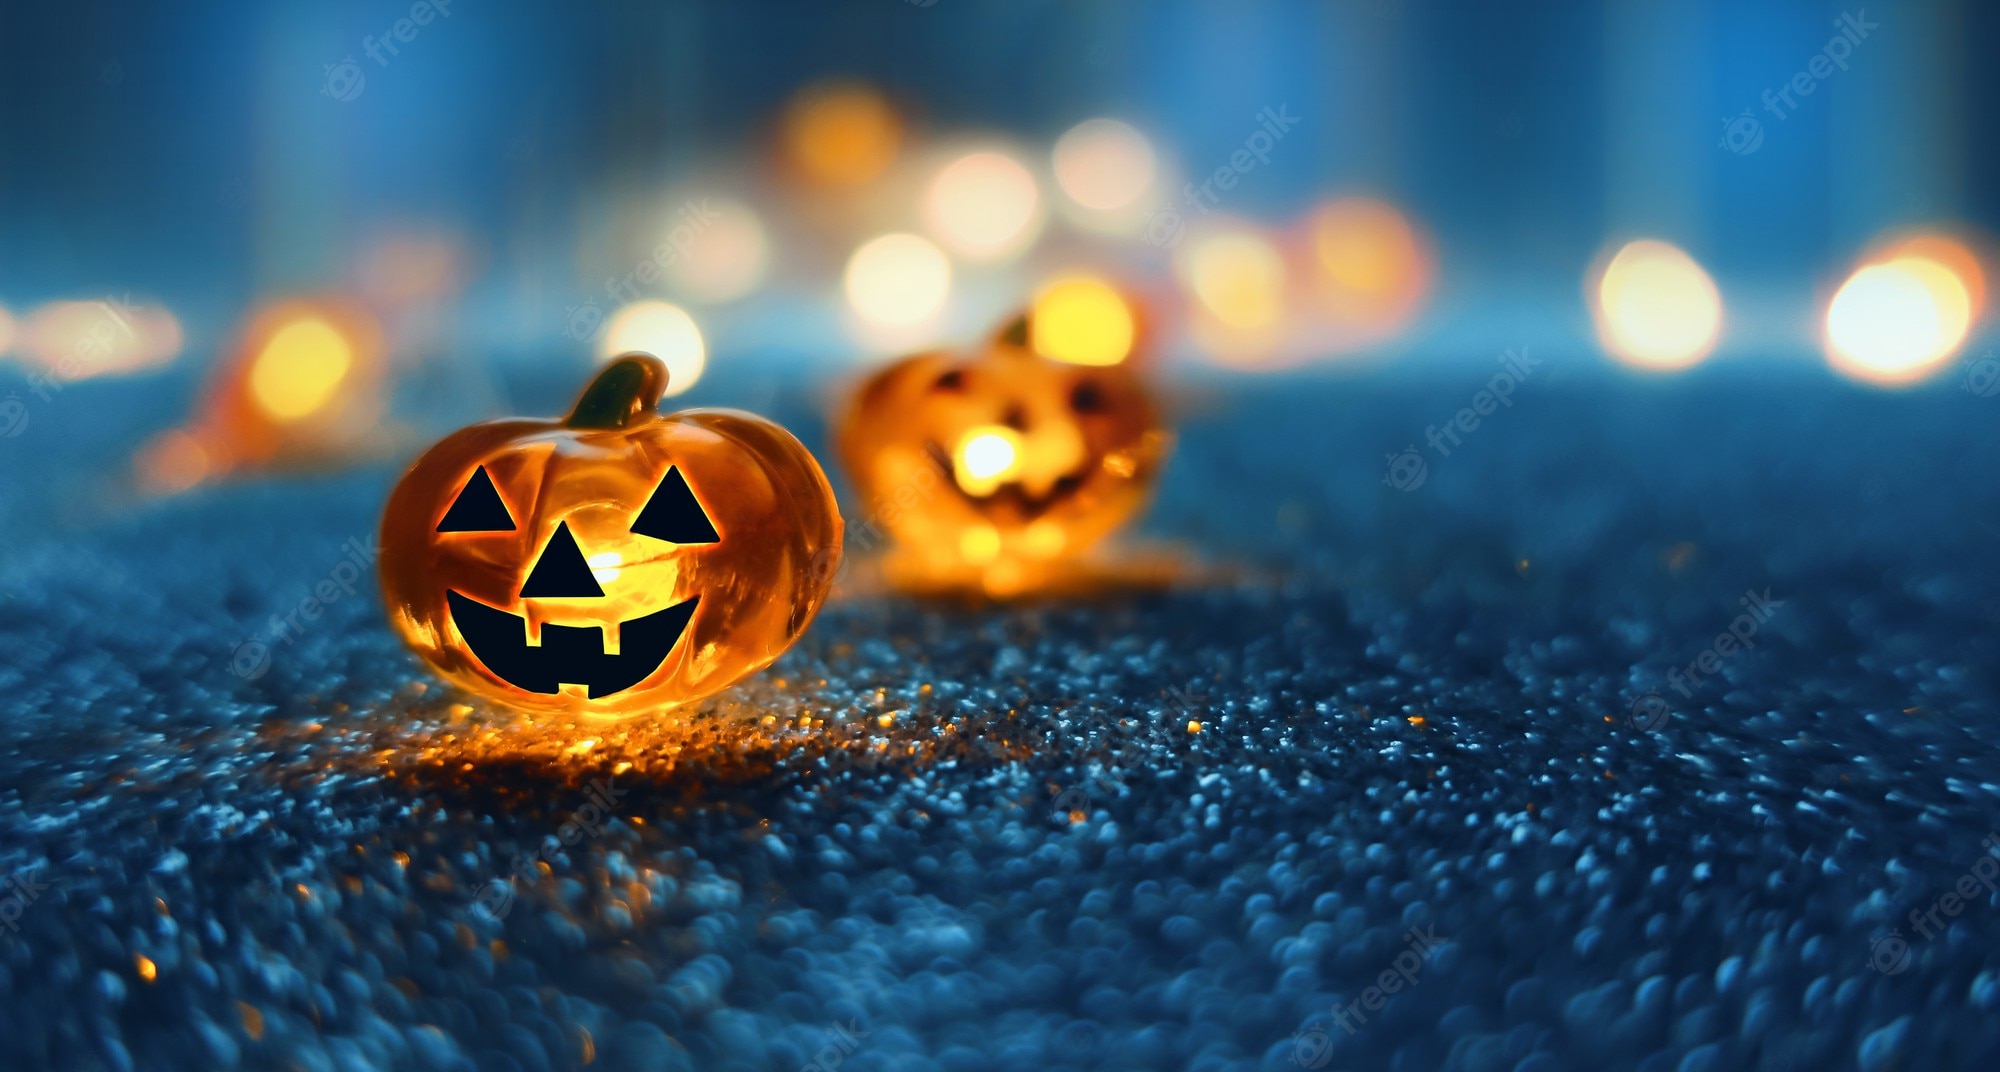 Premium Photo. Neon glowing pumpkin head on abstract blurred bokeh background. festive halloween background with cobwebs and pumpkin